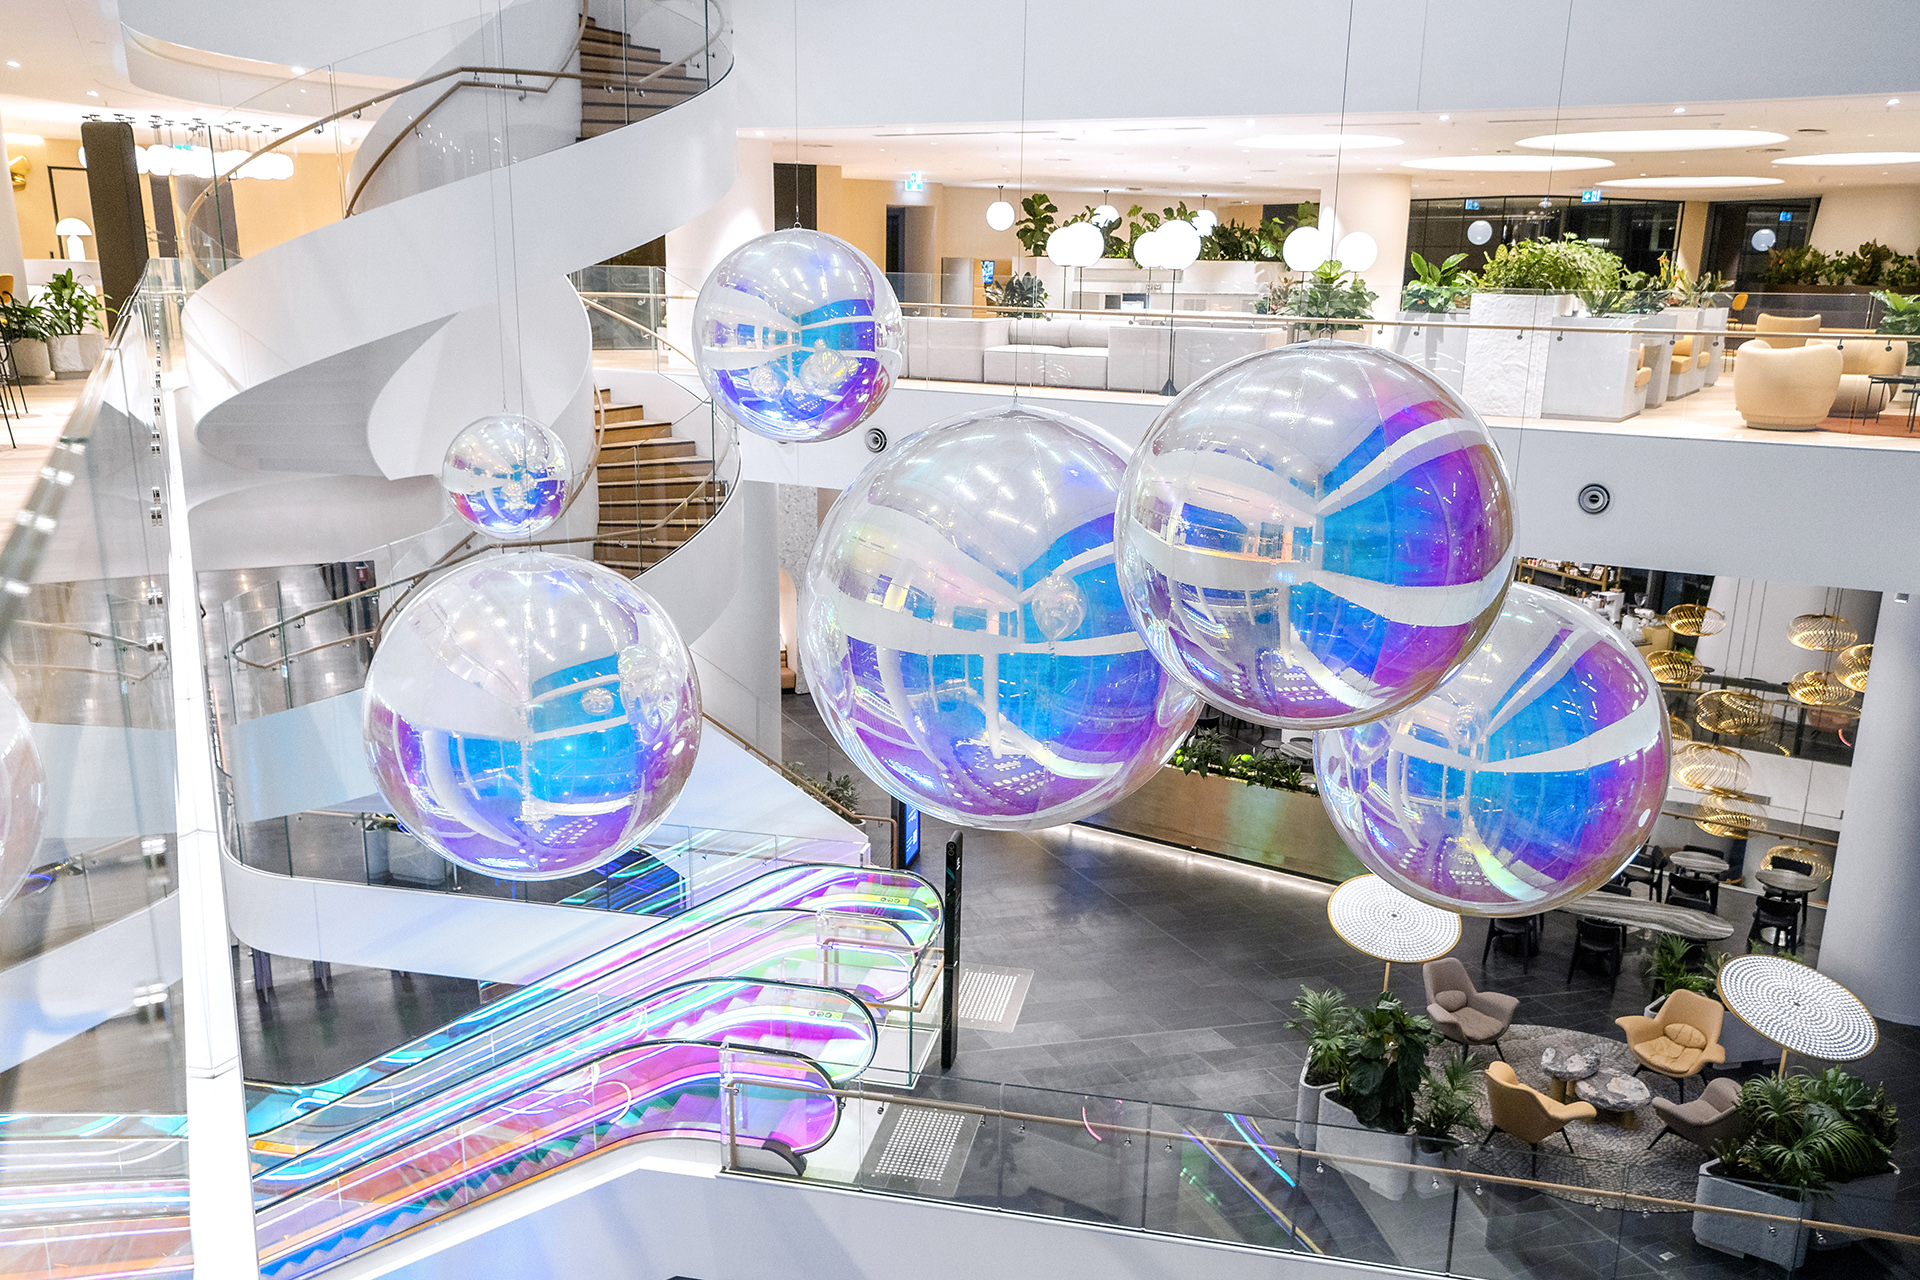 VANDAL Experiential Christmas Campaign for Dexus in the commercial lobby of 50 Bridge Street, Sydney showing dichroic film on escalators and artistic sculpture Christmas tree.